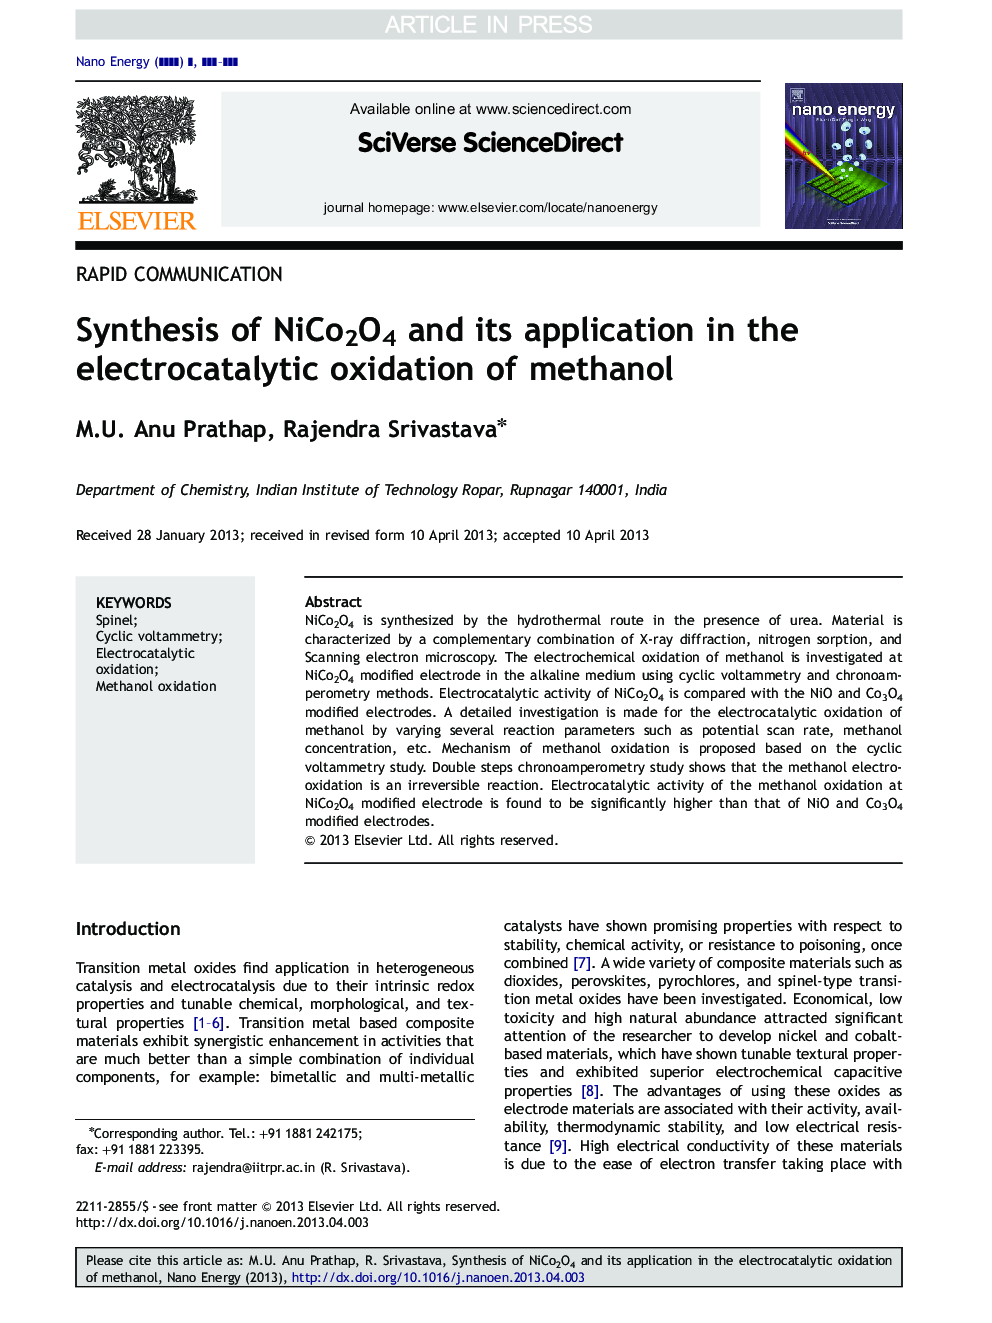 Synthesis of NiCo2O4 and its application in the electrocatalytic oxidation of methanol